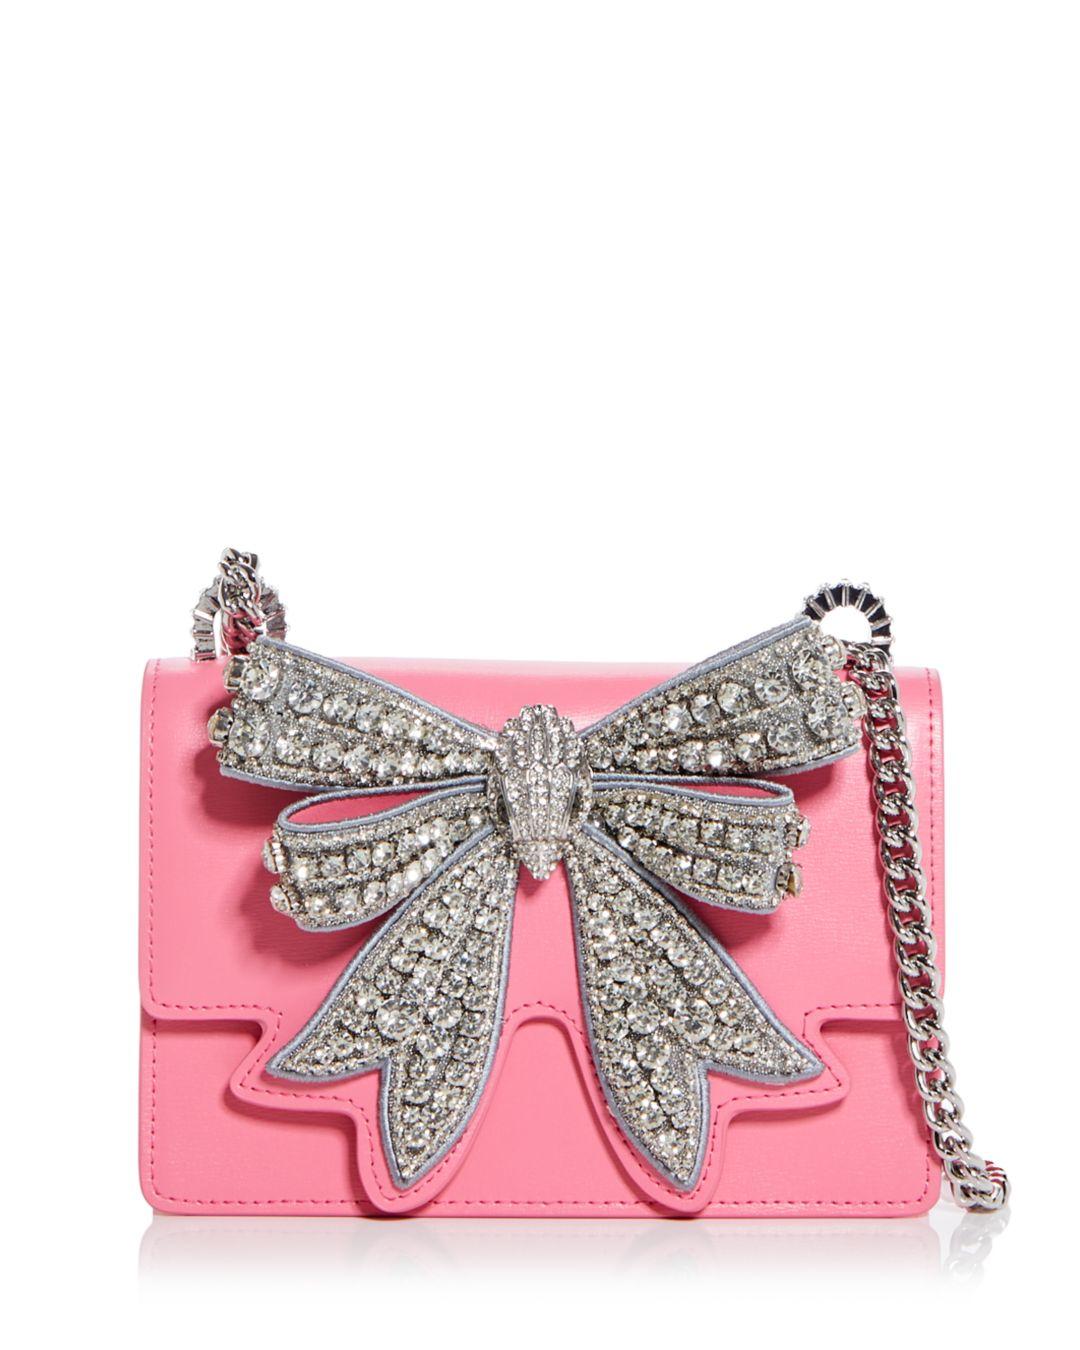 Kurt Geiger Shoreditch Crystal Bow Small Leather Crossbody in Pink | Lyst